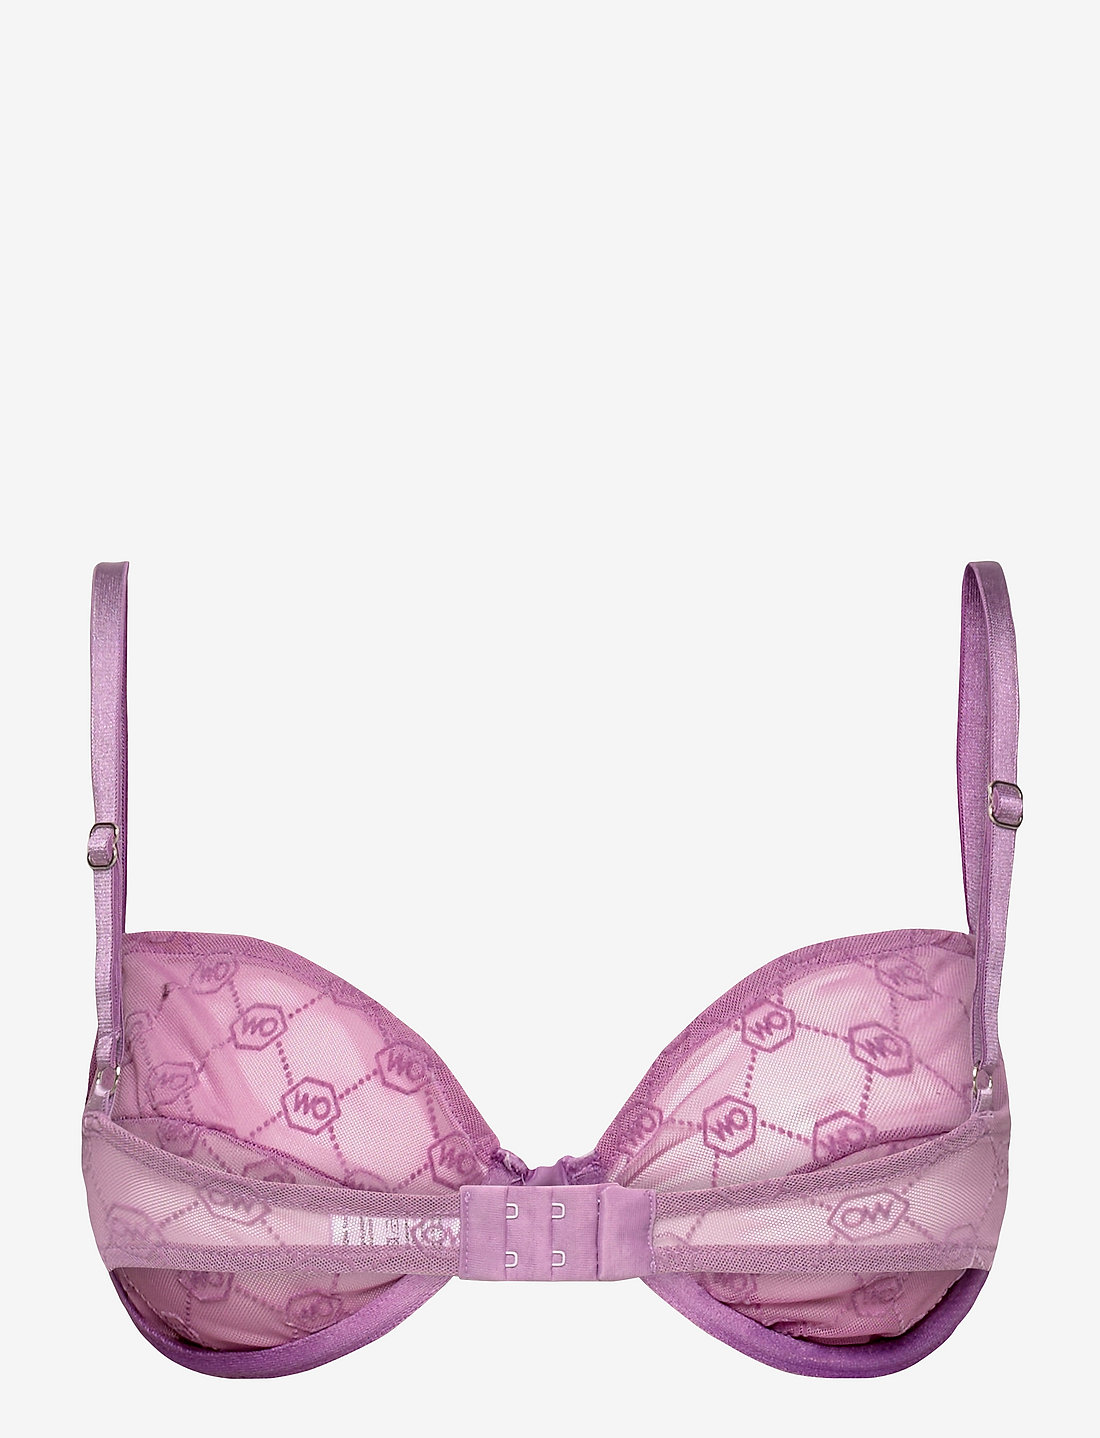 Victoria's Secret 32A Bra Pink Size XS - $15 (70% Off Retail) - From